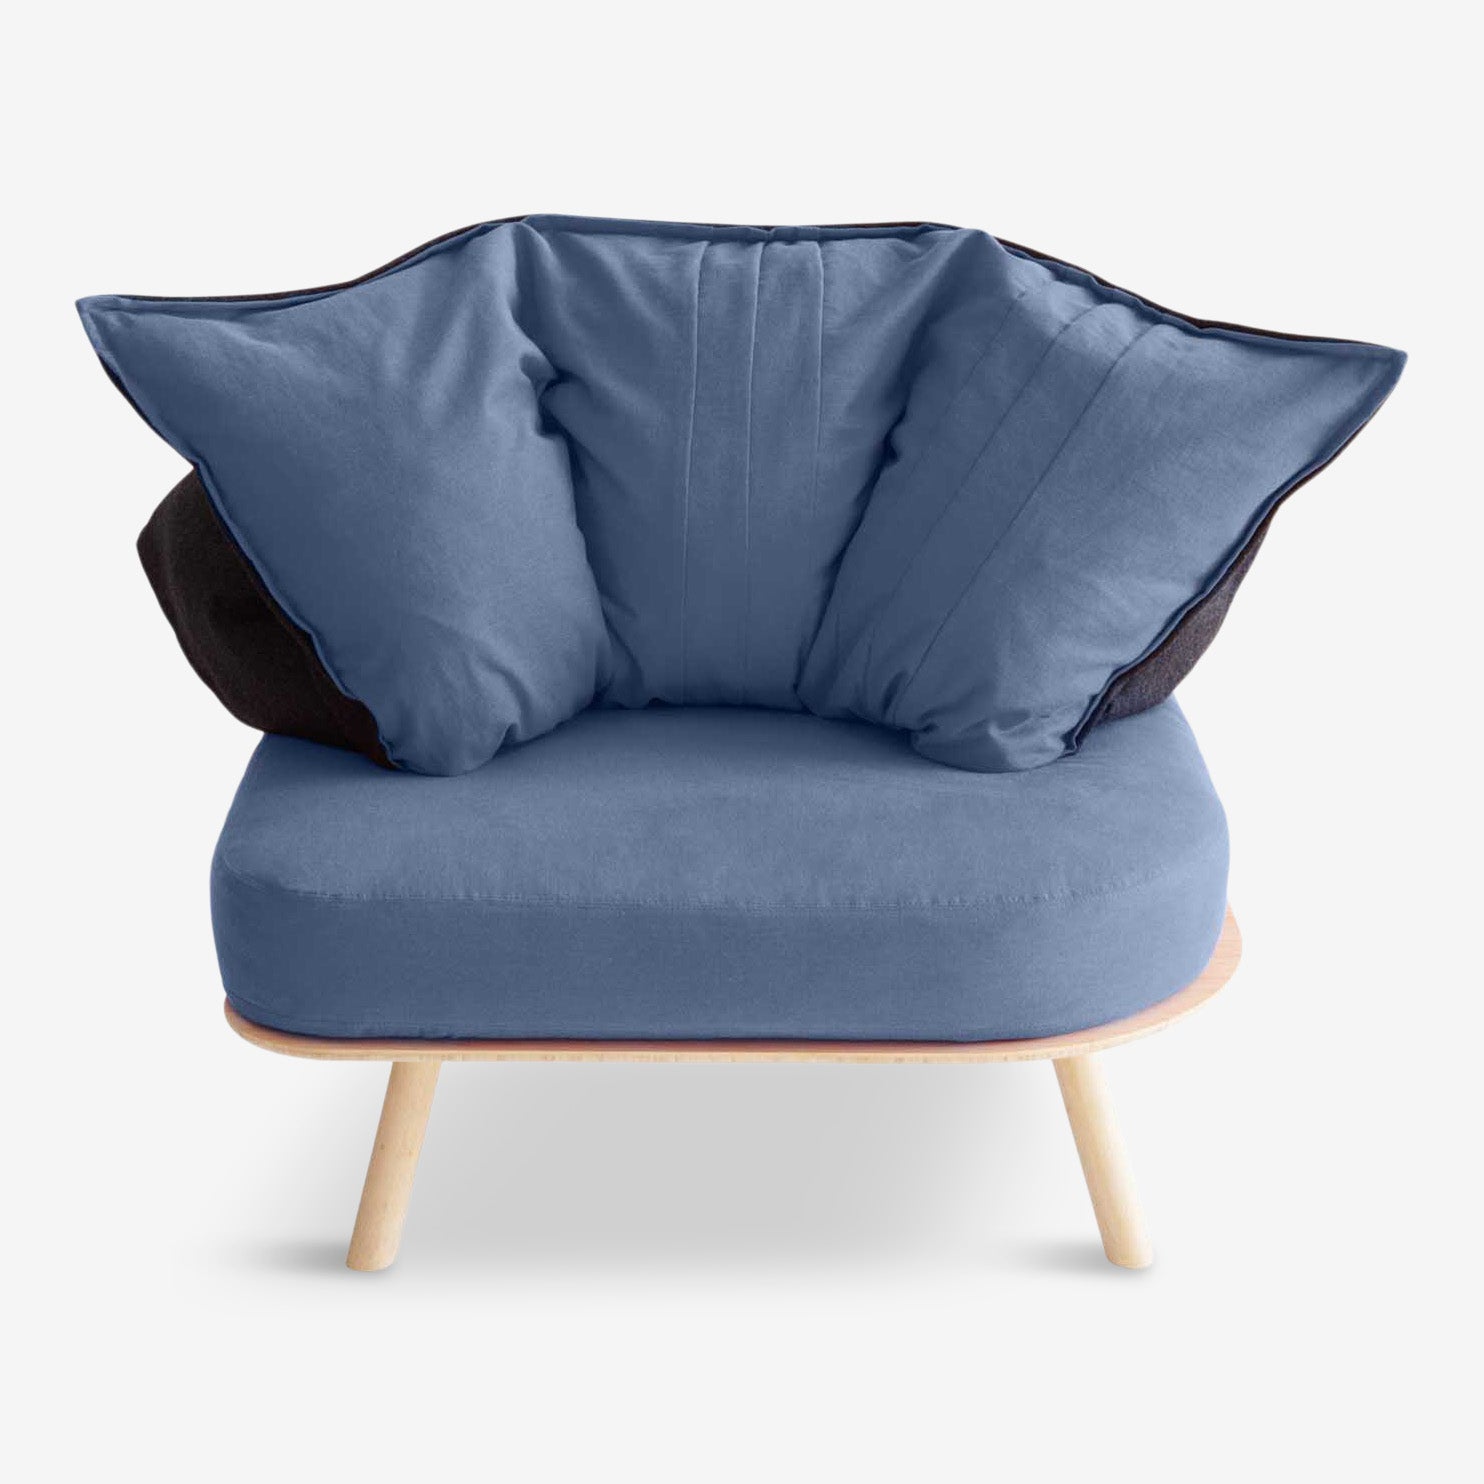 Denis Guidone Disfatto Armchair: Playful Comfort.